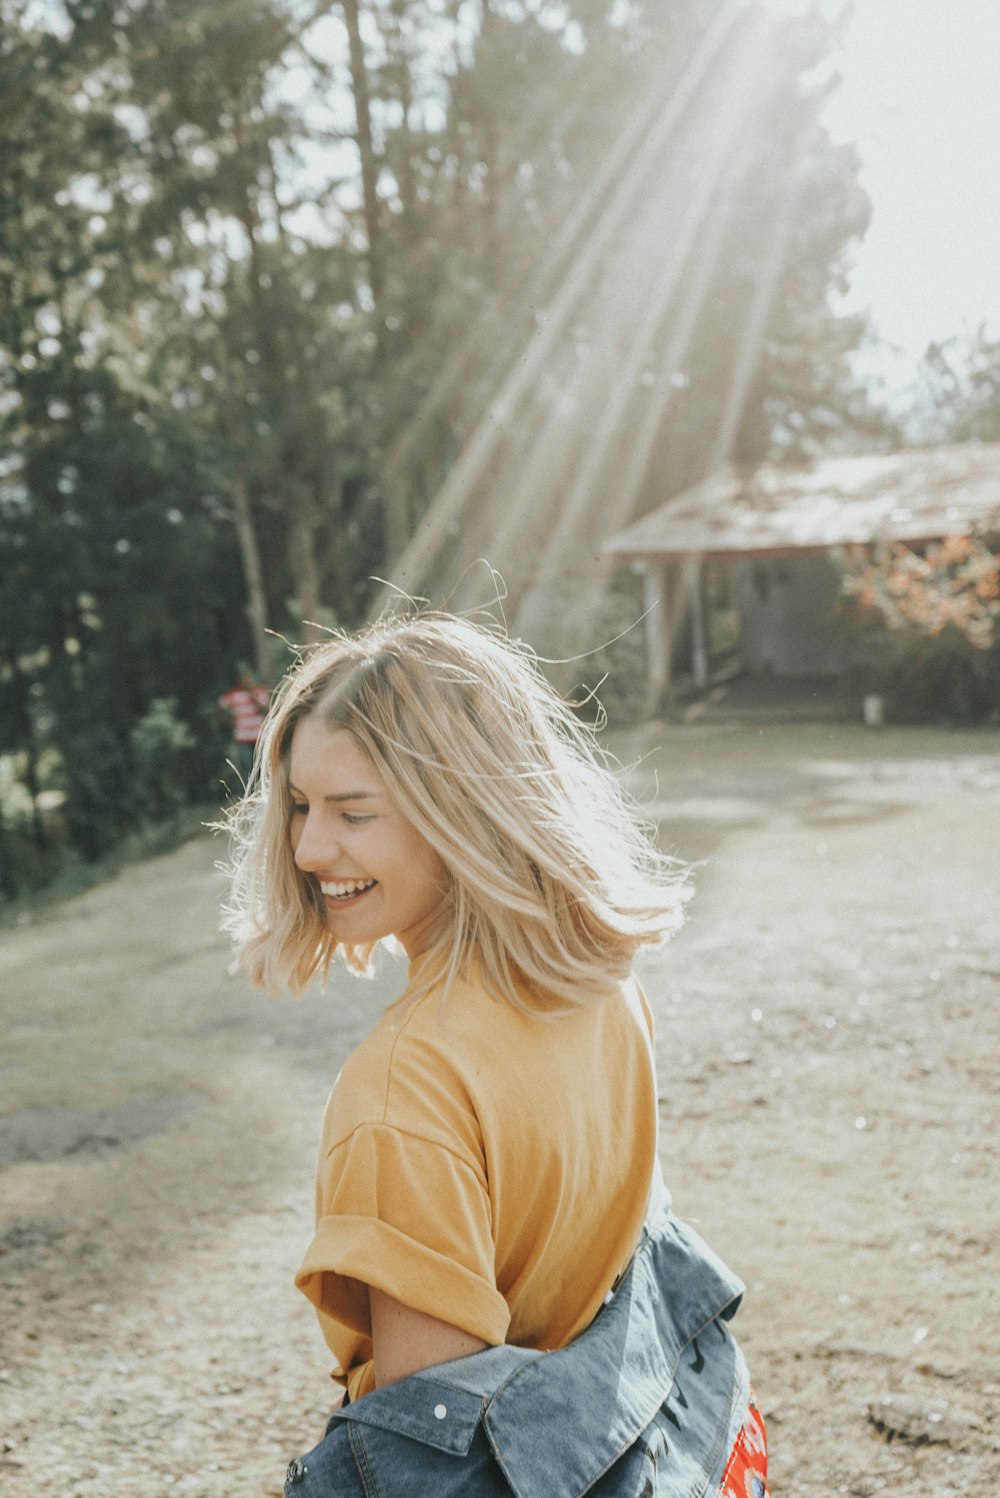 Happy Girls Pictures | Download Free Images on Unsplash